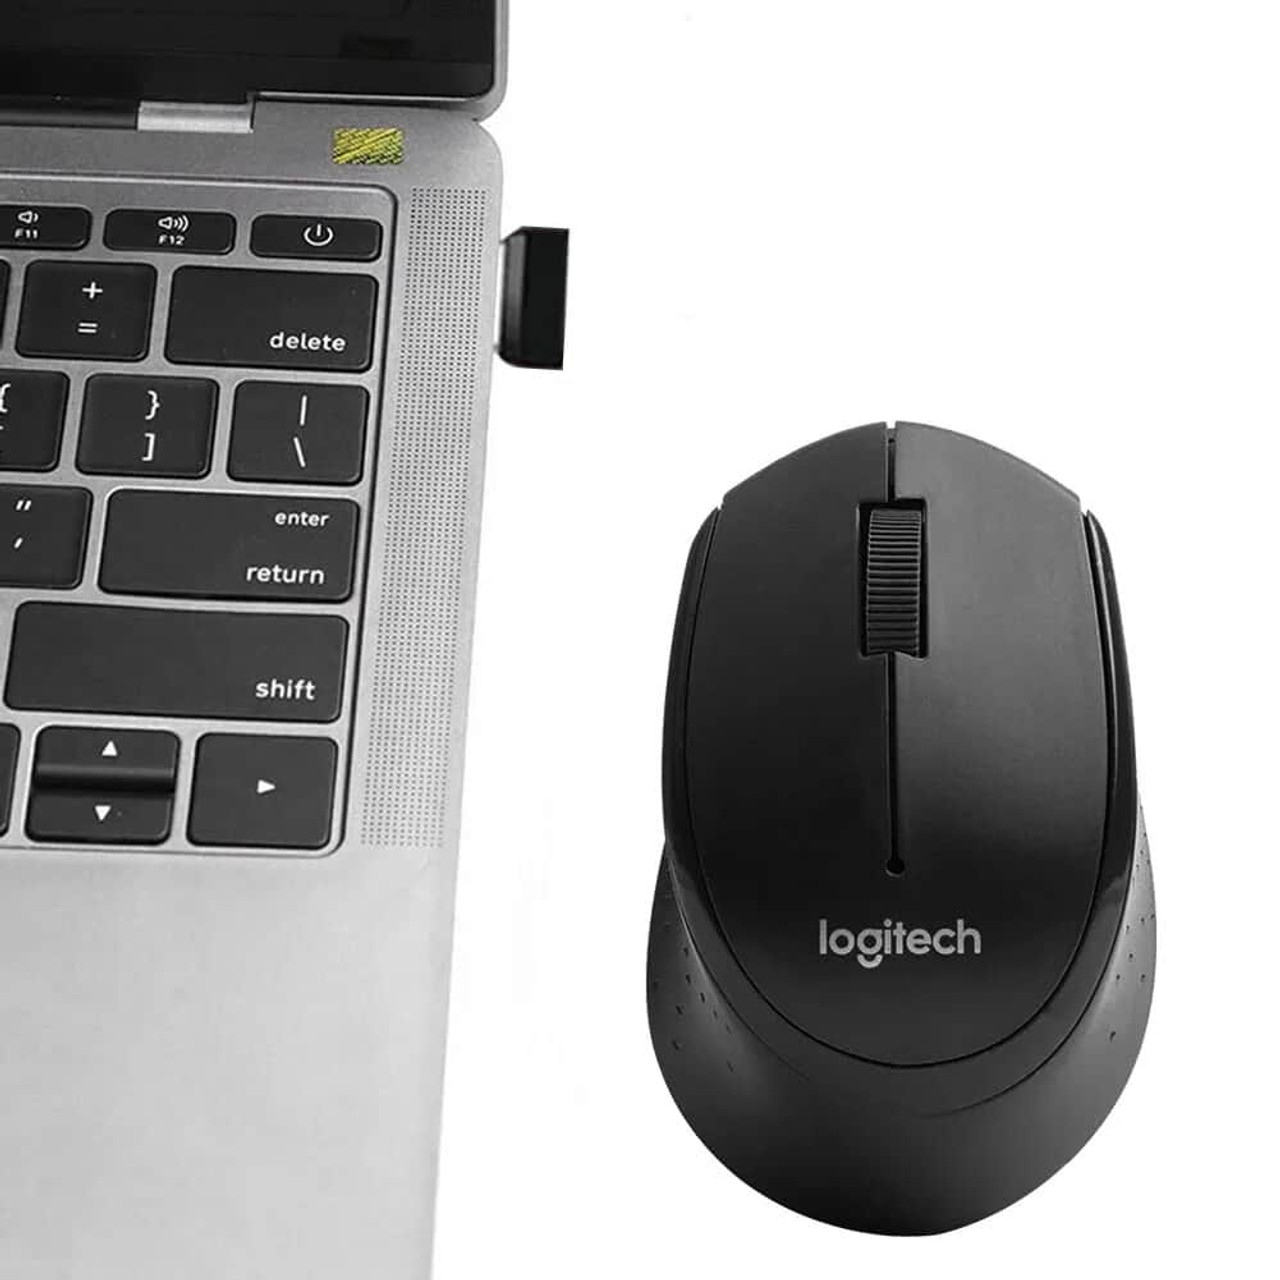 Logitech M330 Wireless Mouse Silent Mouse 1000DPI Silent Optical Mouse 2.4GHz With USB Receiver Mice for Office Home Using PC